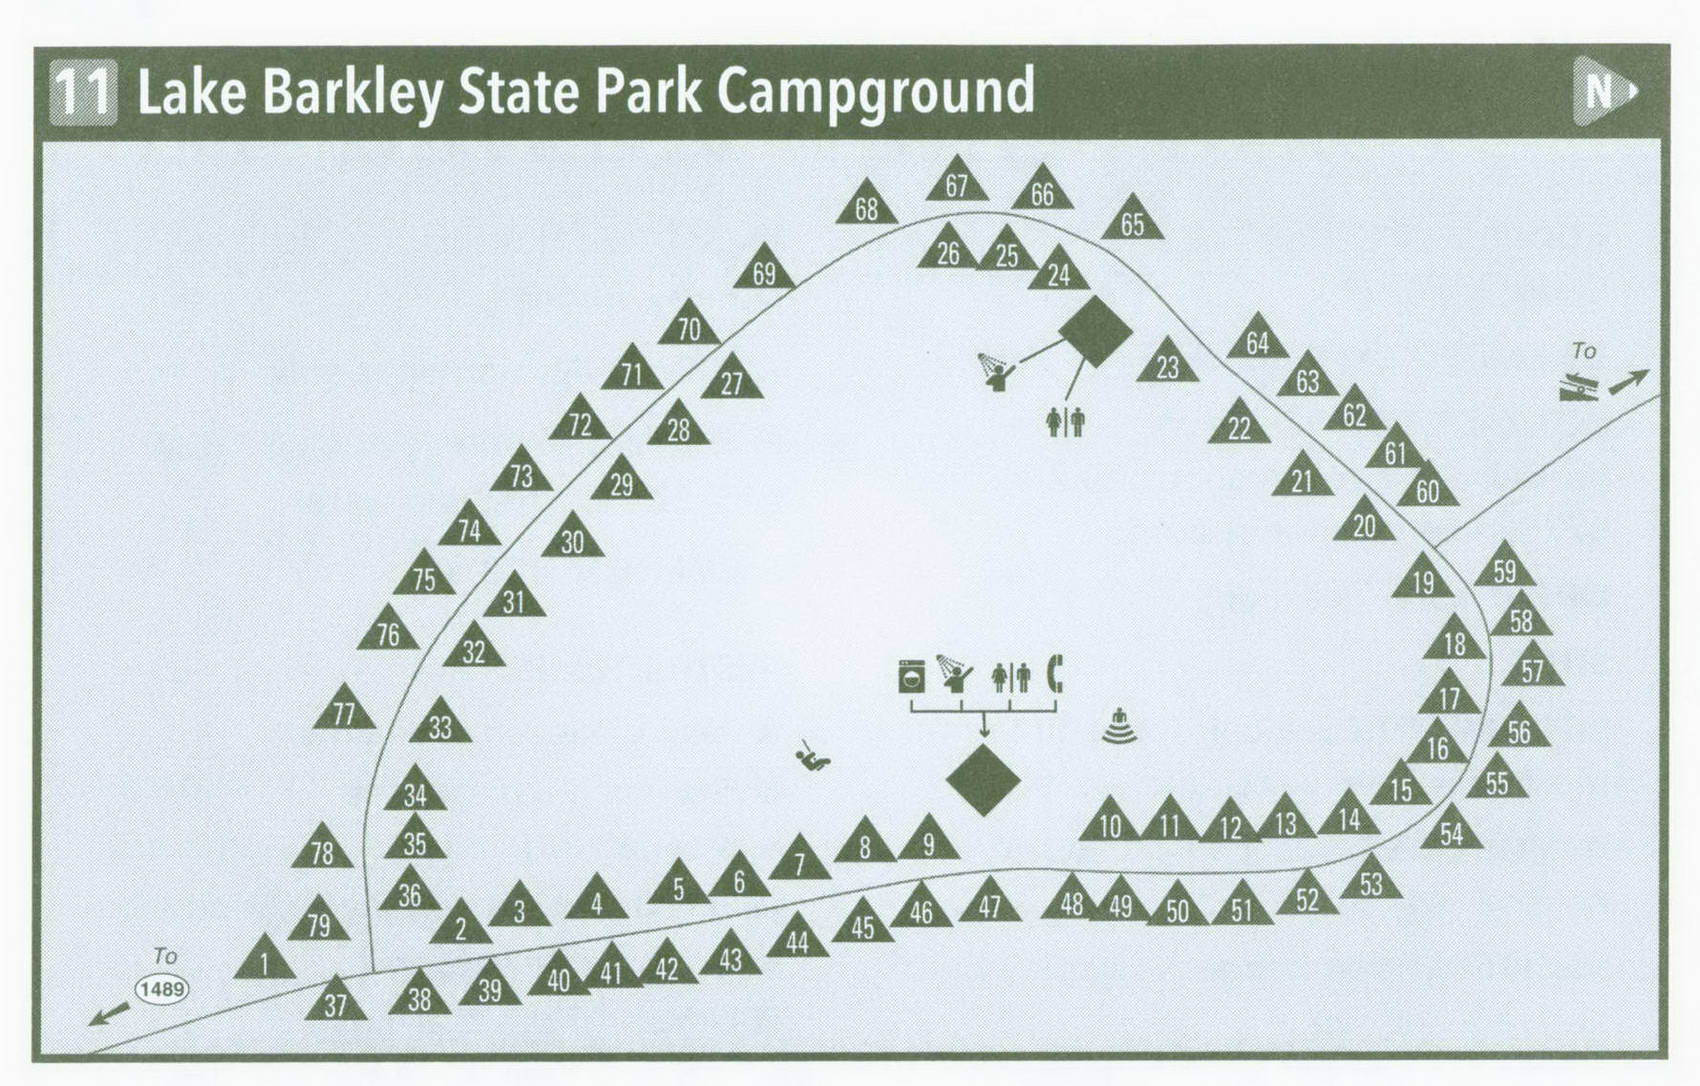 Plan of Lake Barkley State Park Campground